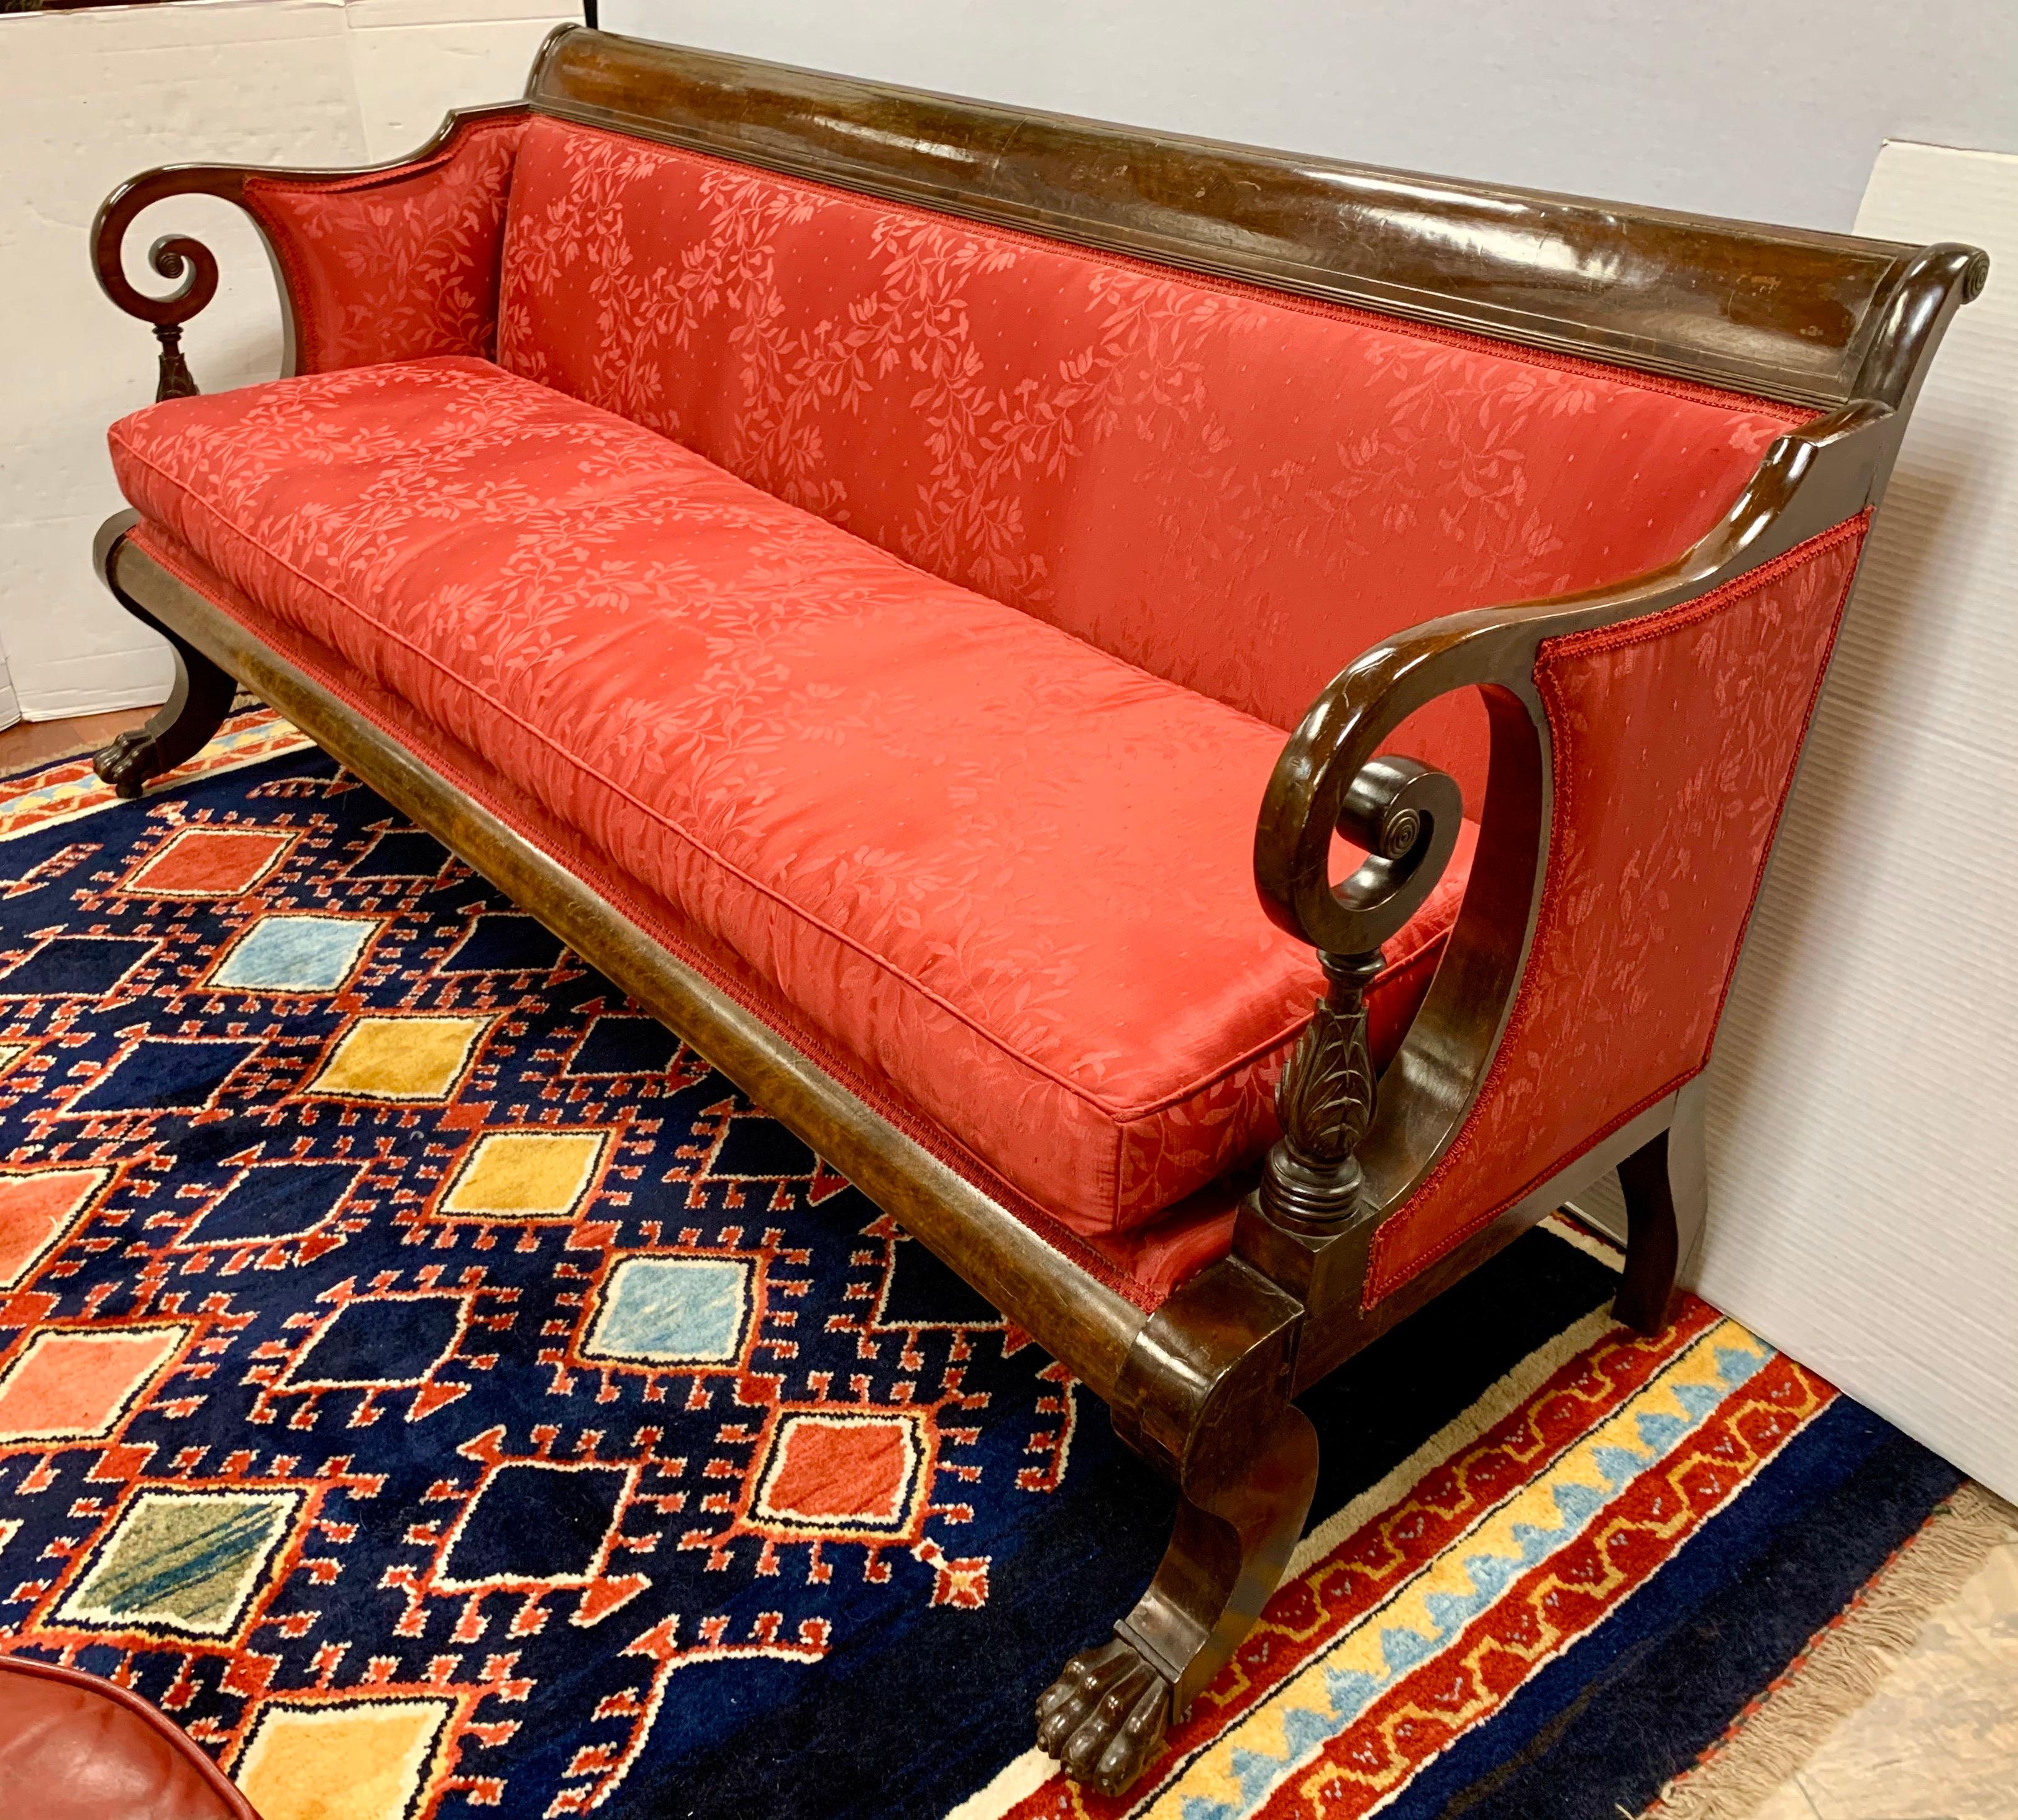 Antique 19th century empire sofa made of solid mahogany with scroll arms and carved lion paws with castors on front, upholstered in a red silk fabric. Down seat cushion makes it very comfortable.  Circa New York 1820-1935.